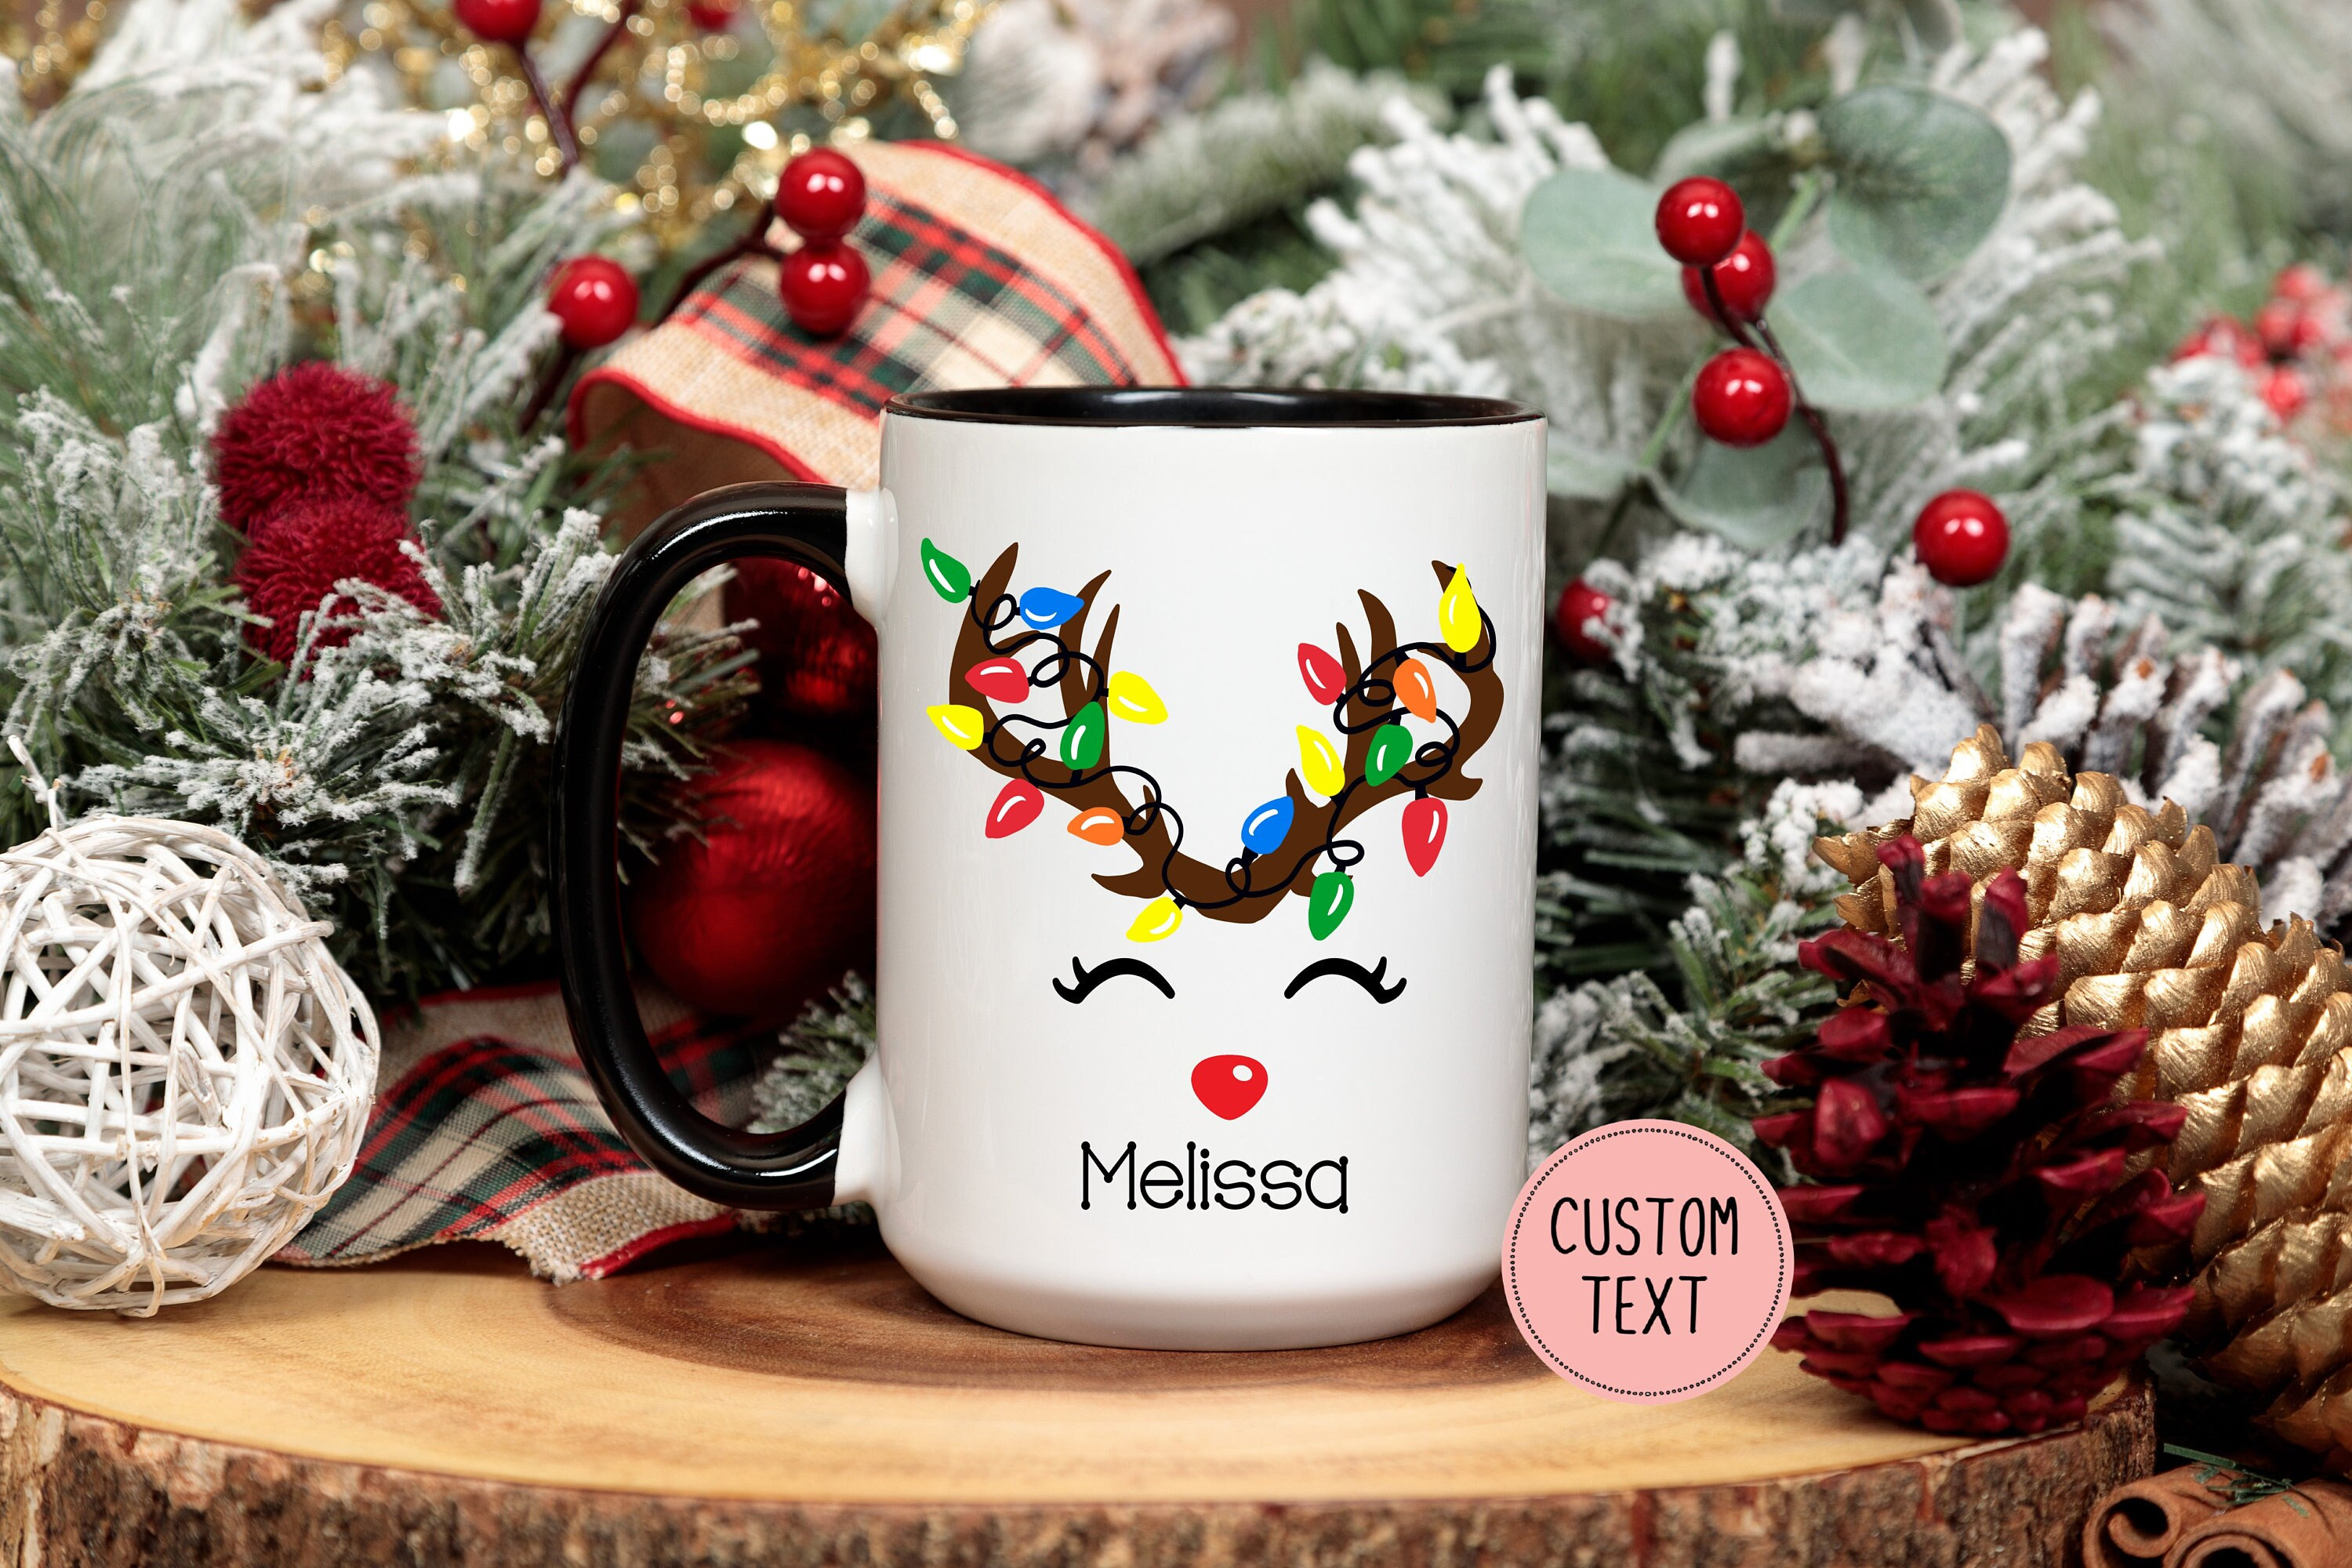 15 oz. Personalized Christmas Round Reusable Plastic Cups with